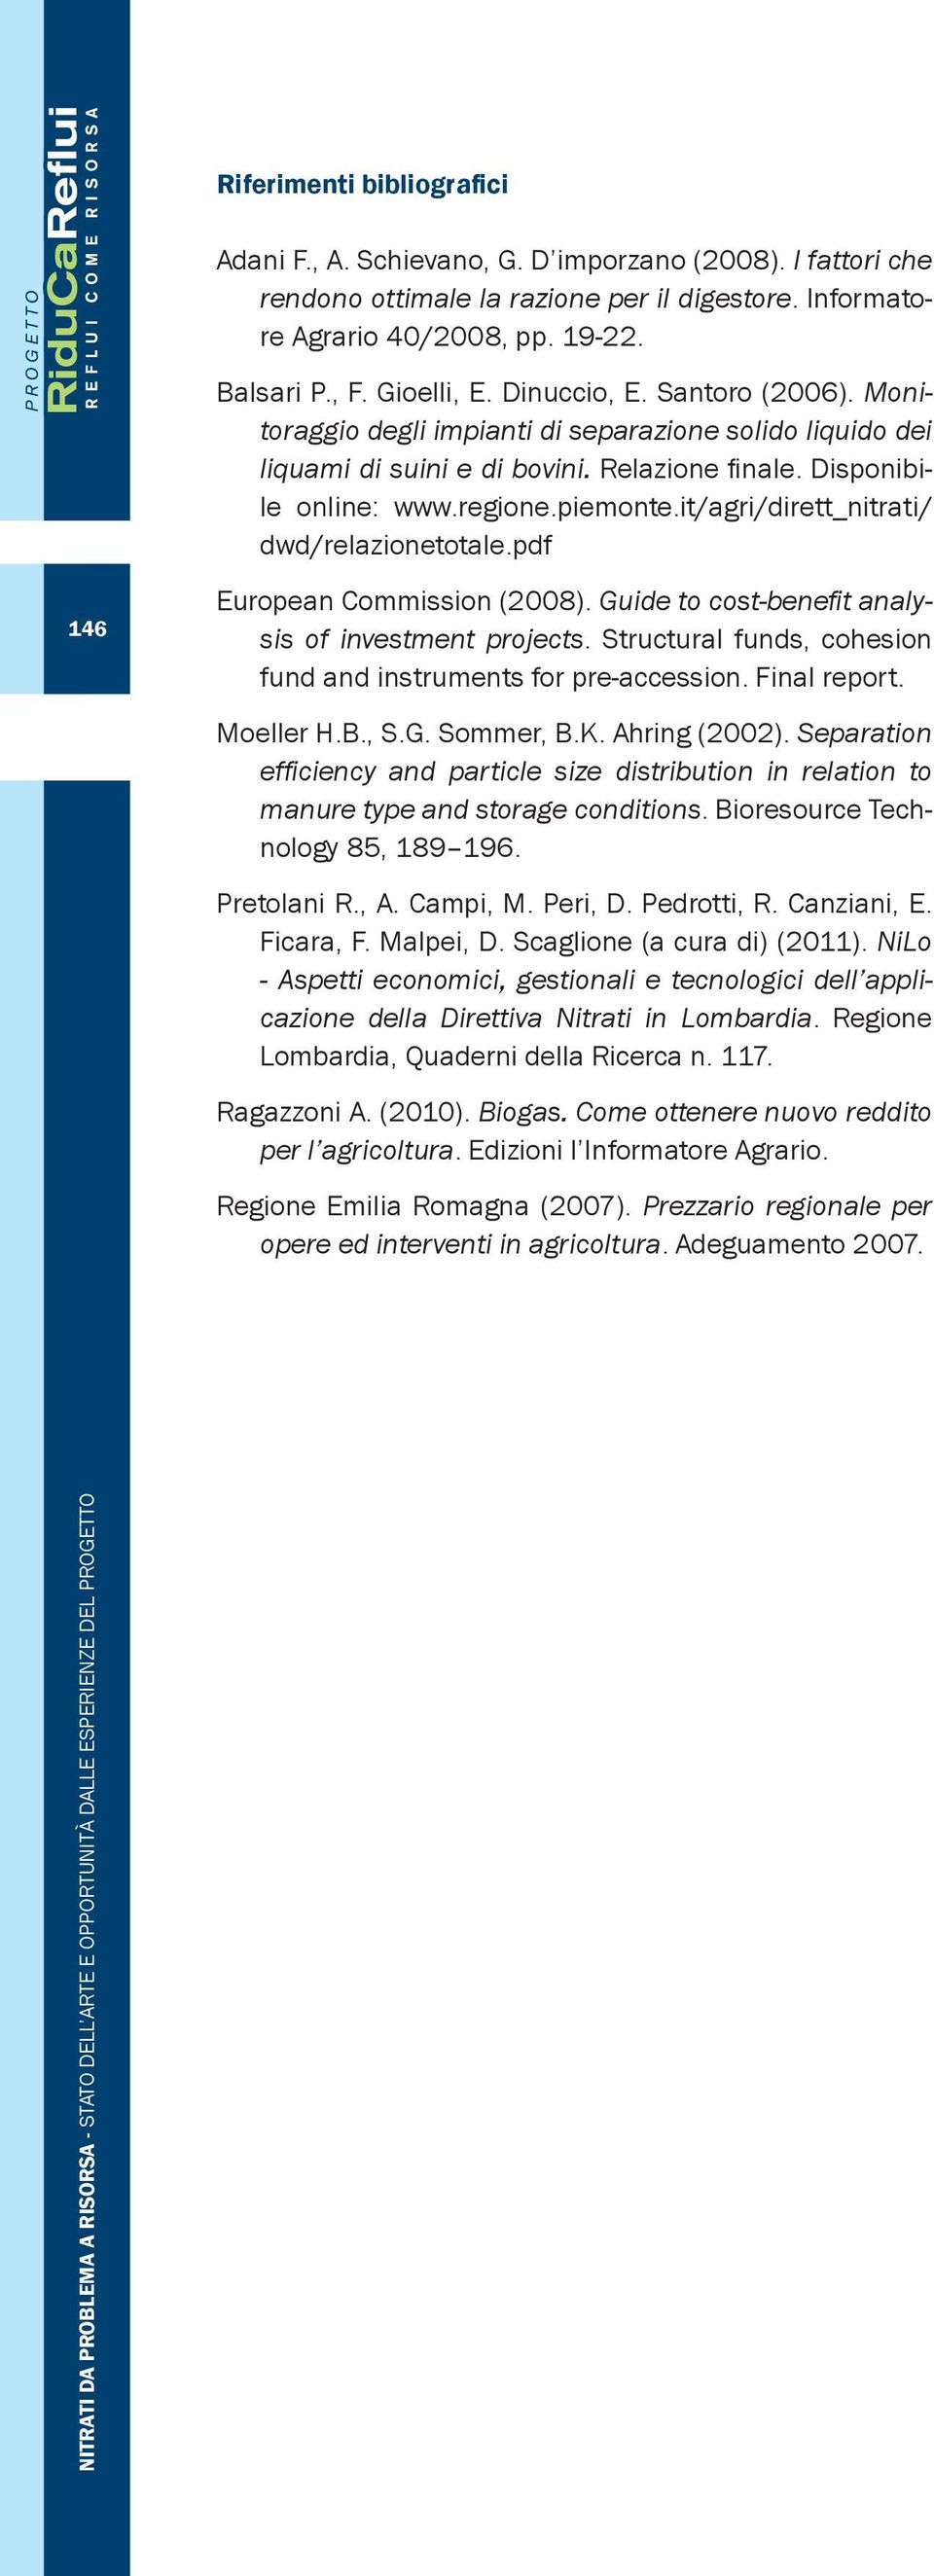 it/agri/dirett_nitrati/ dwd/relazionetotale.pdf 146 European Commission (2008). Guide to cost-benefit analysis of investment projects.